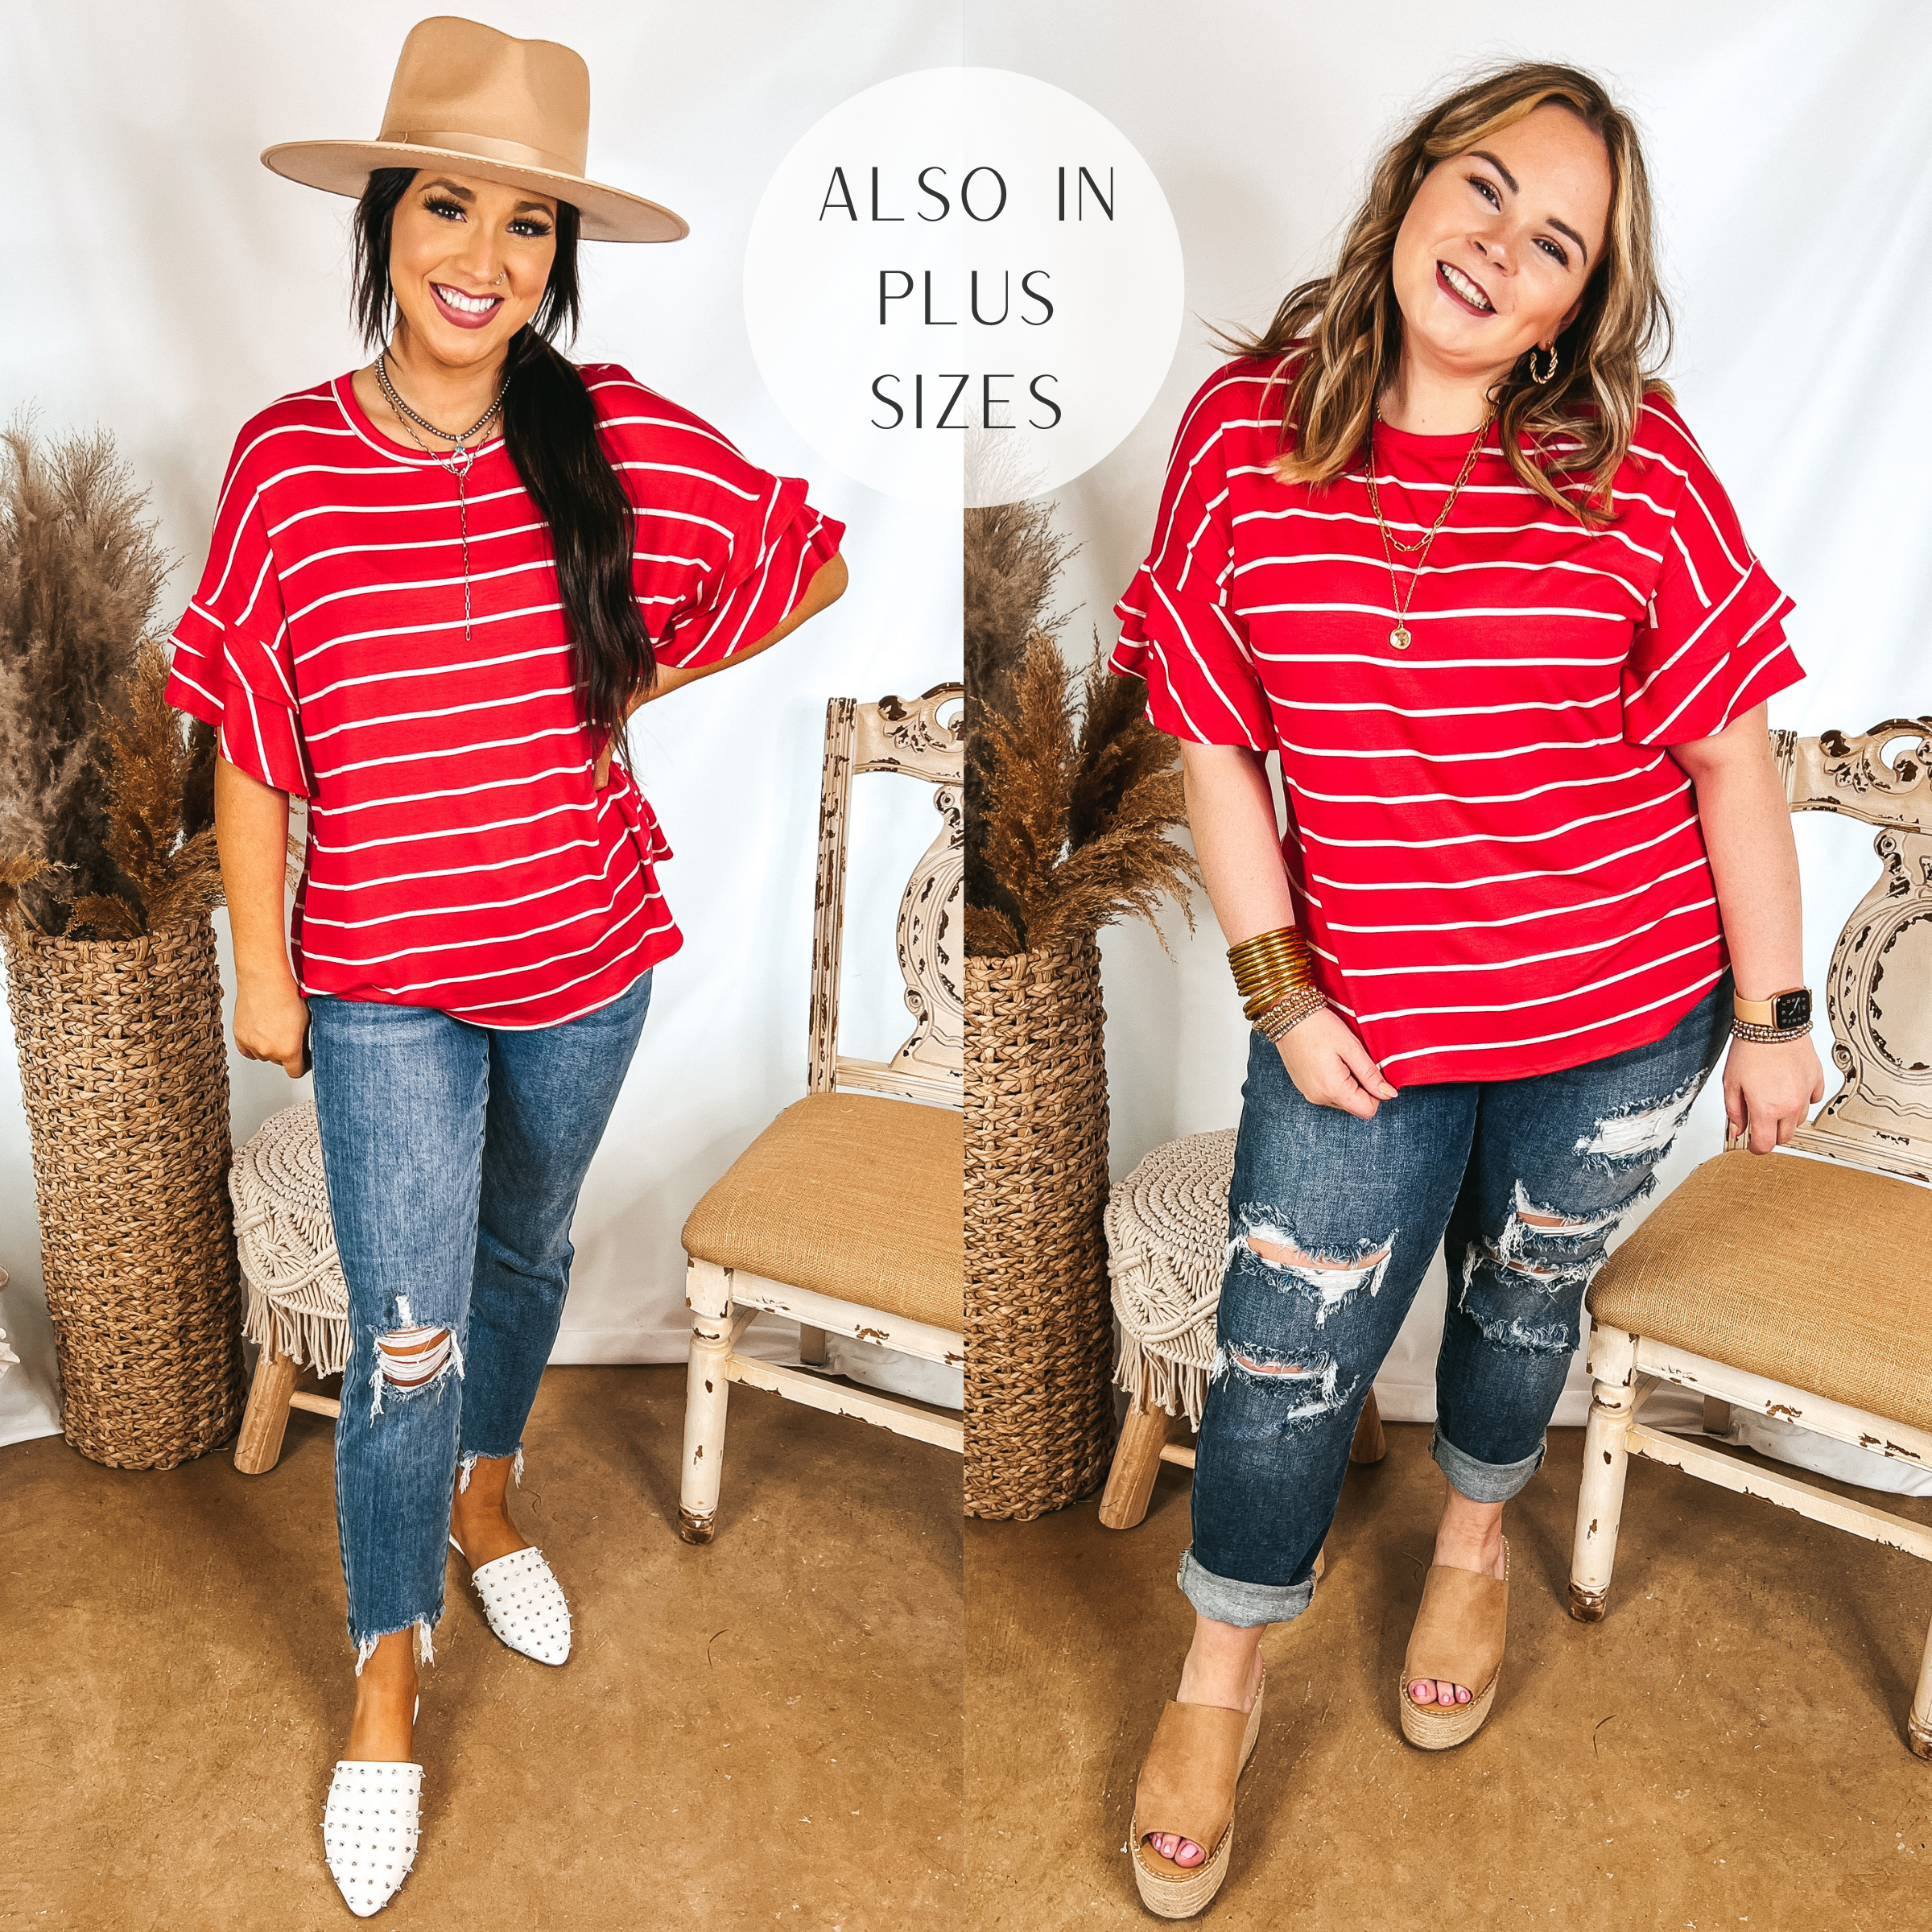 Models are wearing a red and white striped top that has ruffle sleeves. Size small model has it paired with distressed boyfriend jeans, white mules, and a tan hat. Size large model has it paired with distressed boyfriend jeans, tan wedges, and gold jewelry.